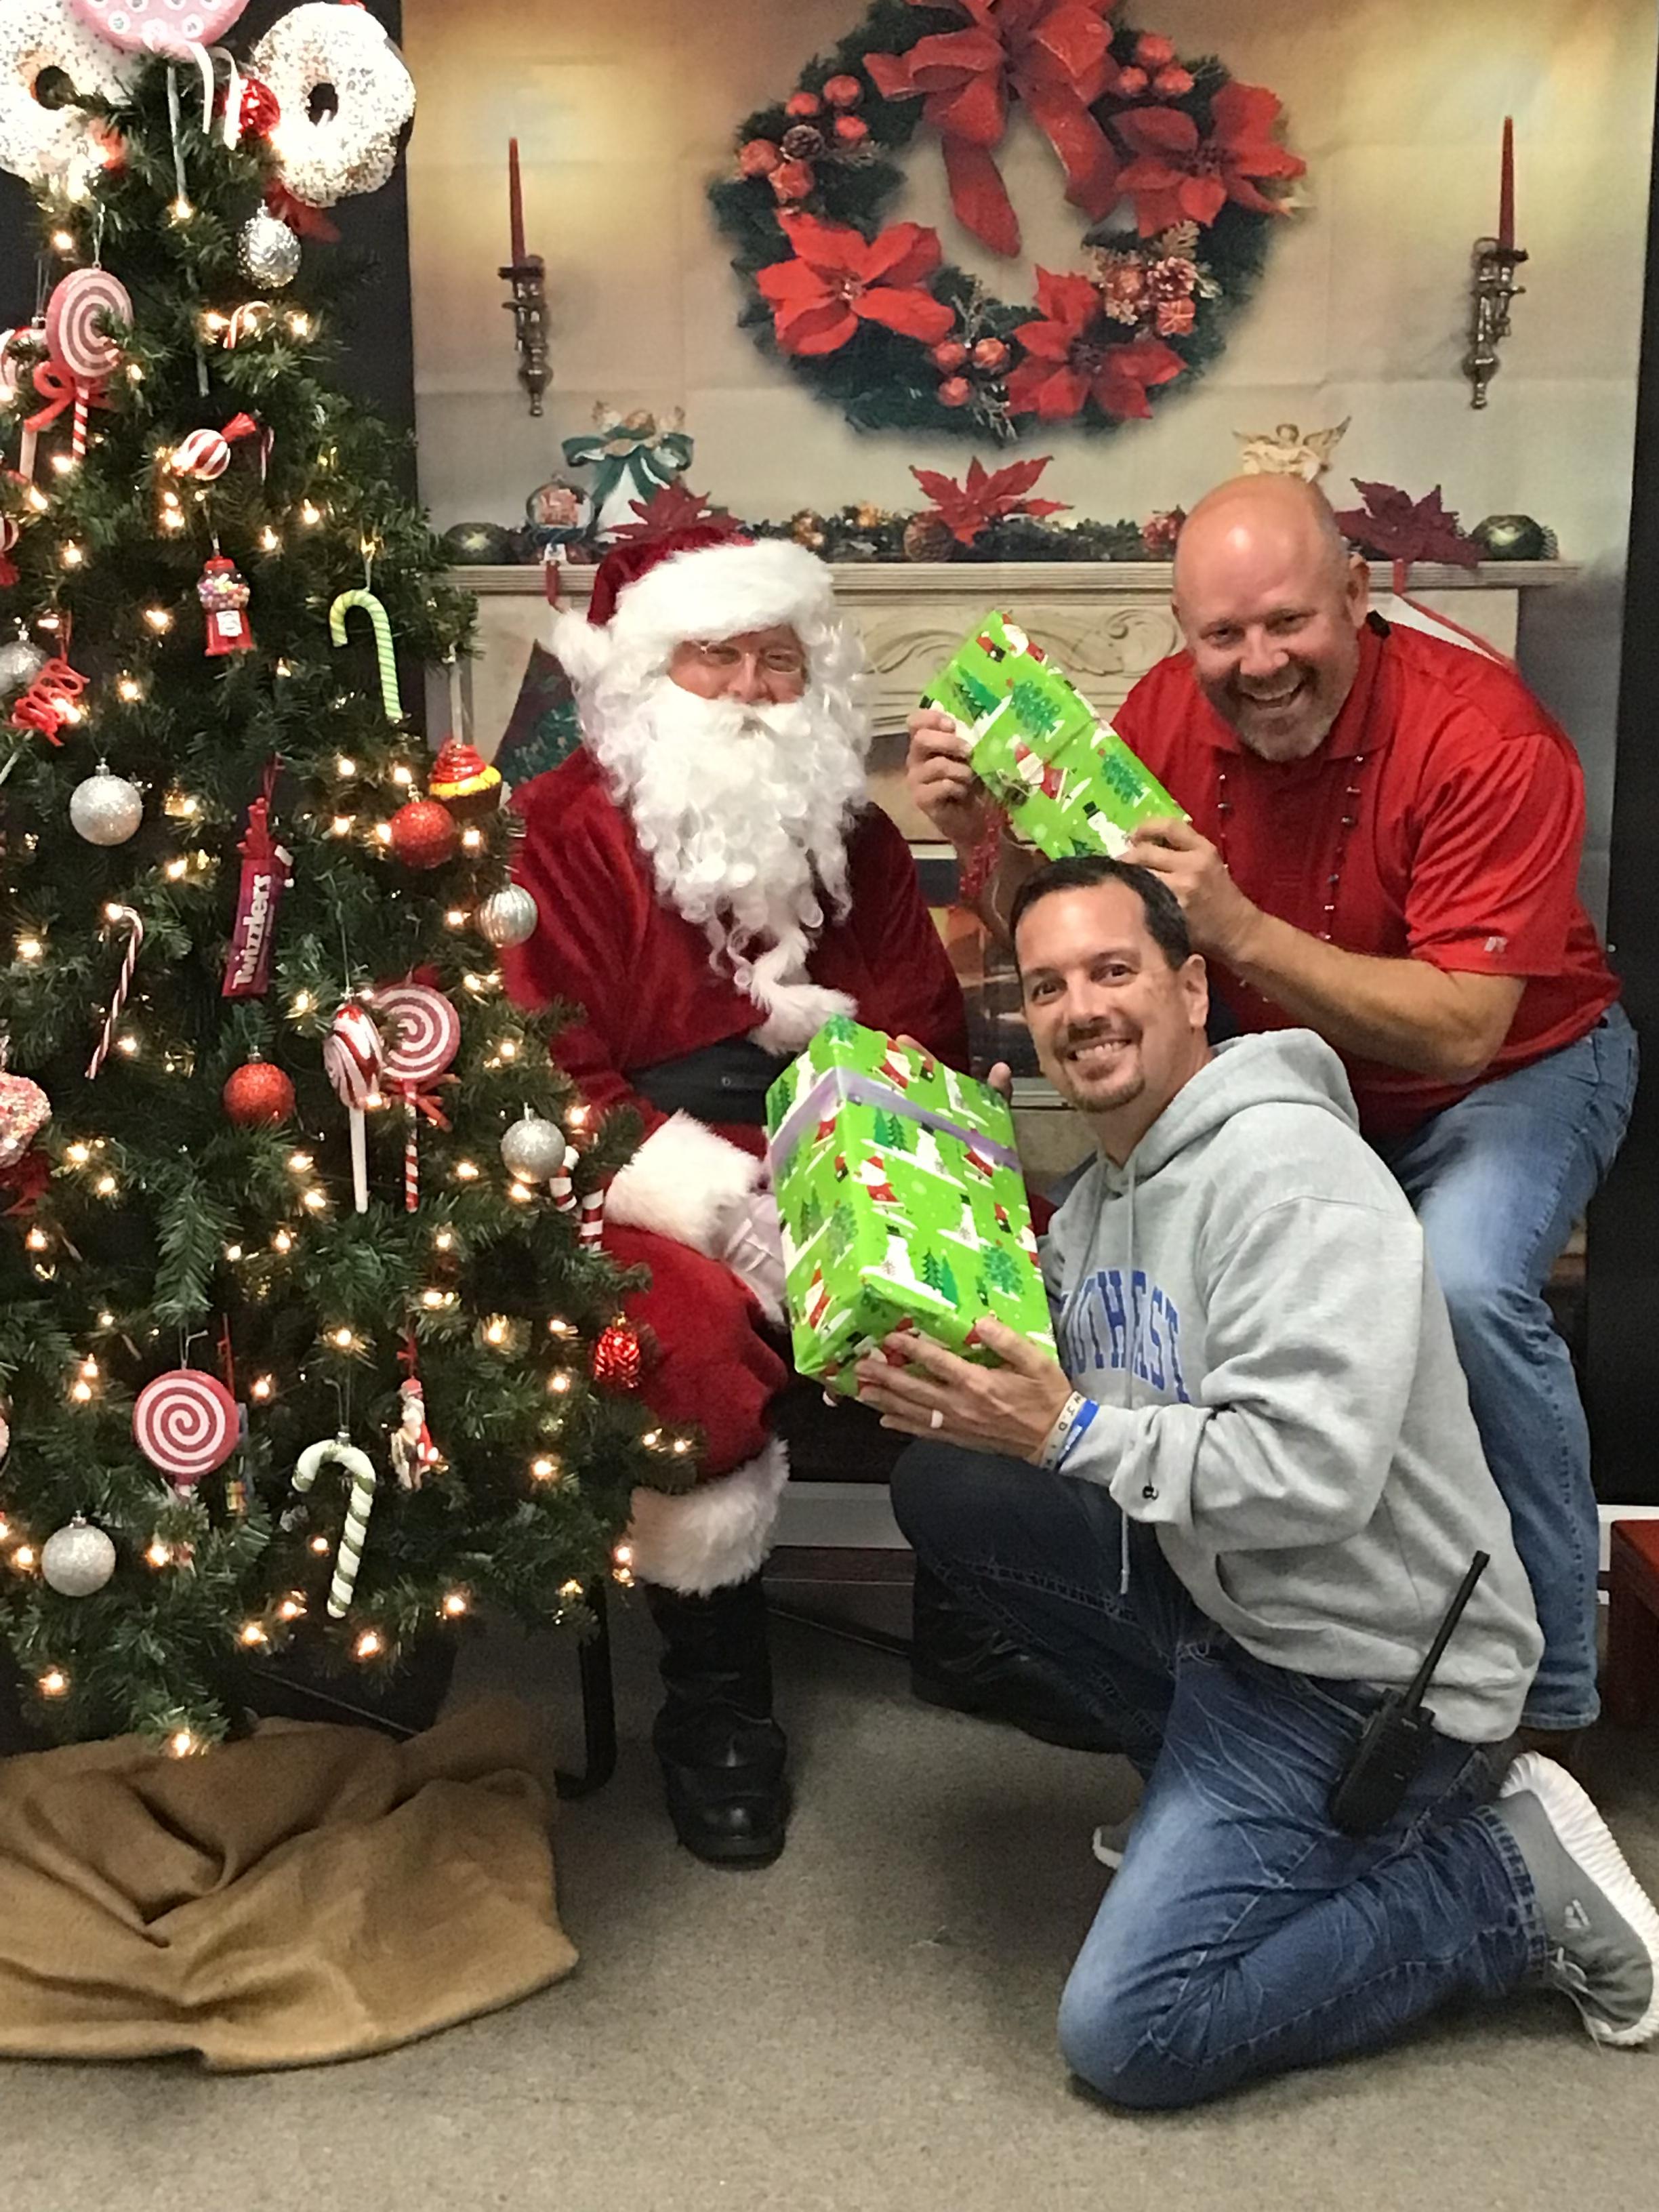 Mr. Powell and Dr. Holfield with Santa